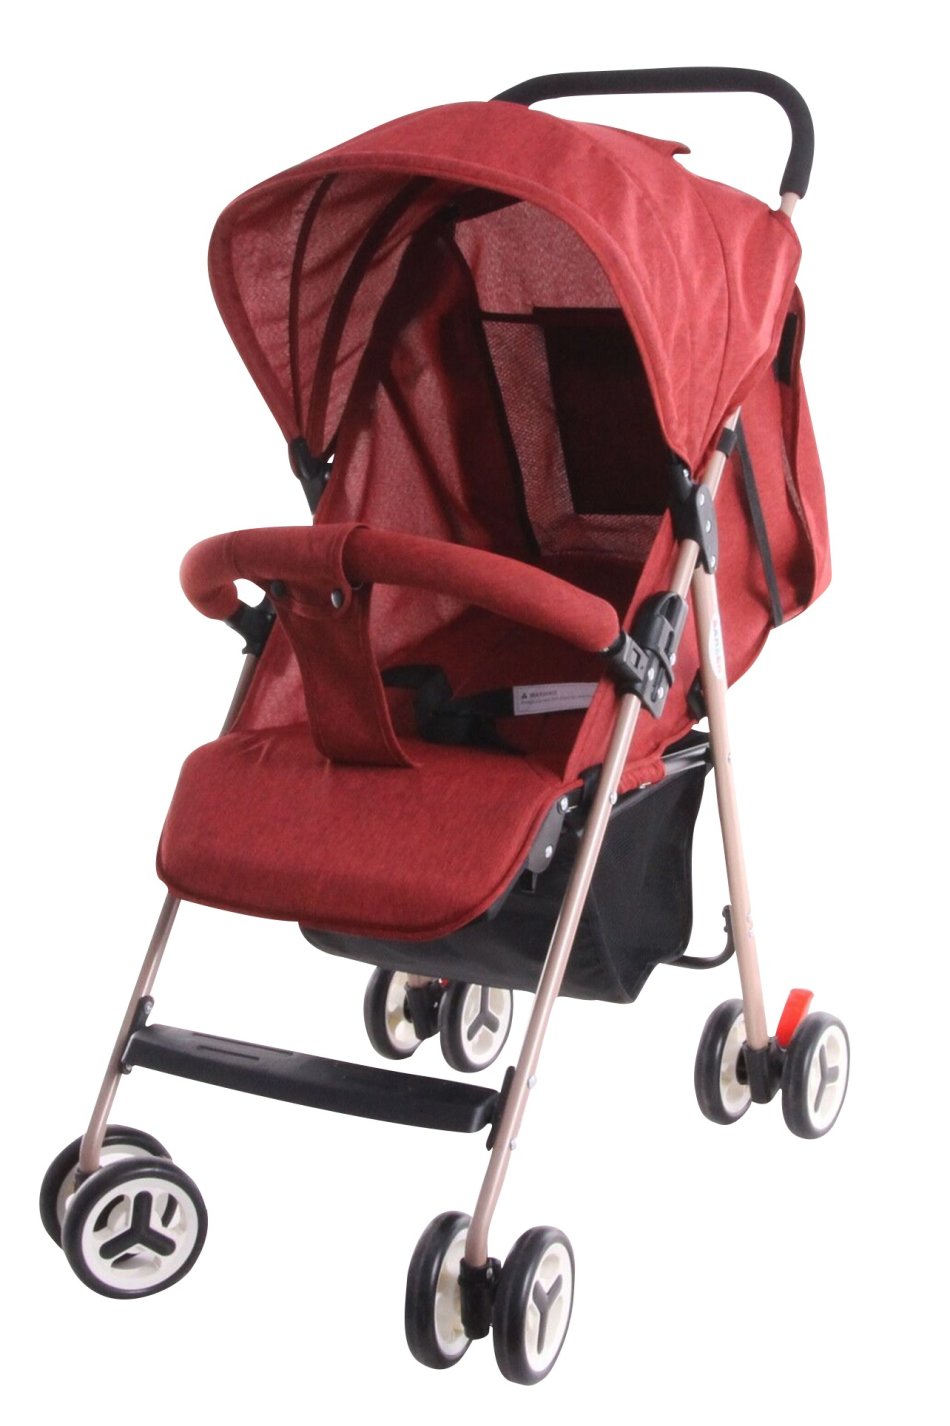 Strollers - Baneen Baby Stroller Pram with Multi-position Reclining ...